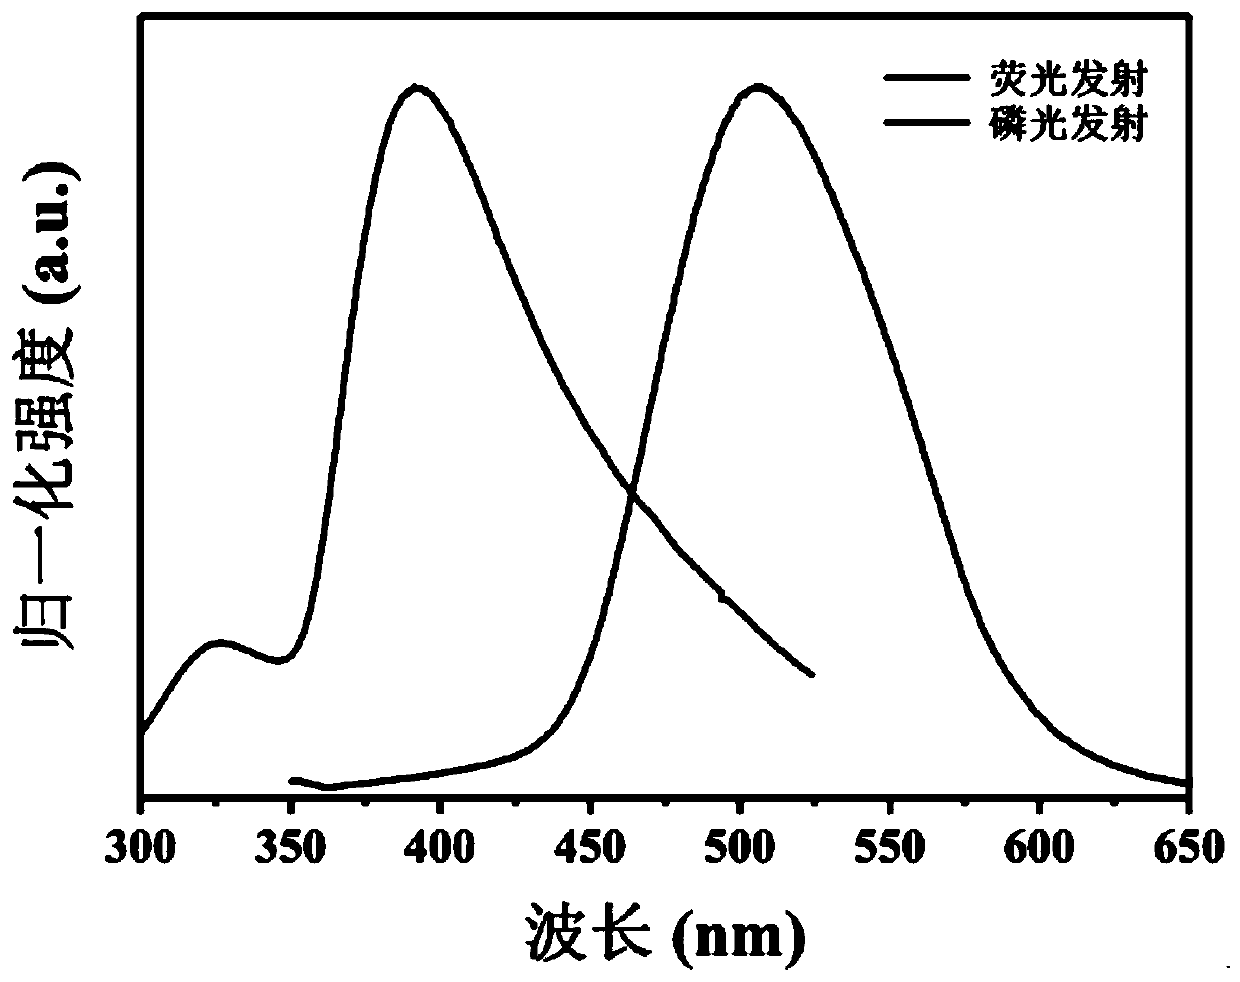 Preparation method and application of water-phase room-temperature phosphorescent carbon dot material